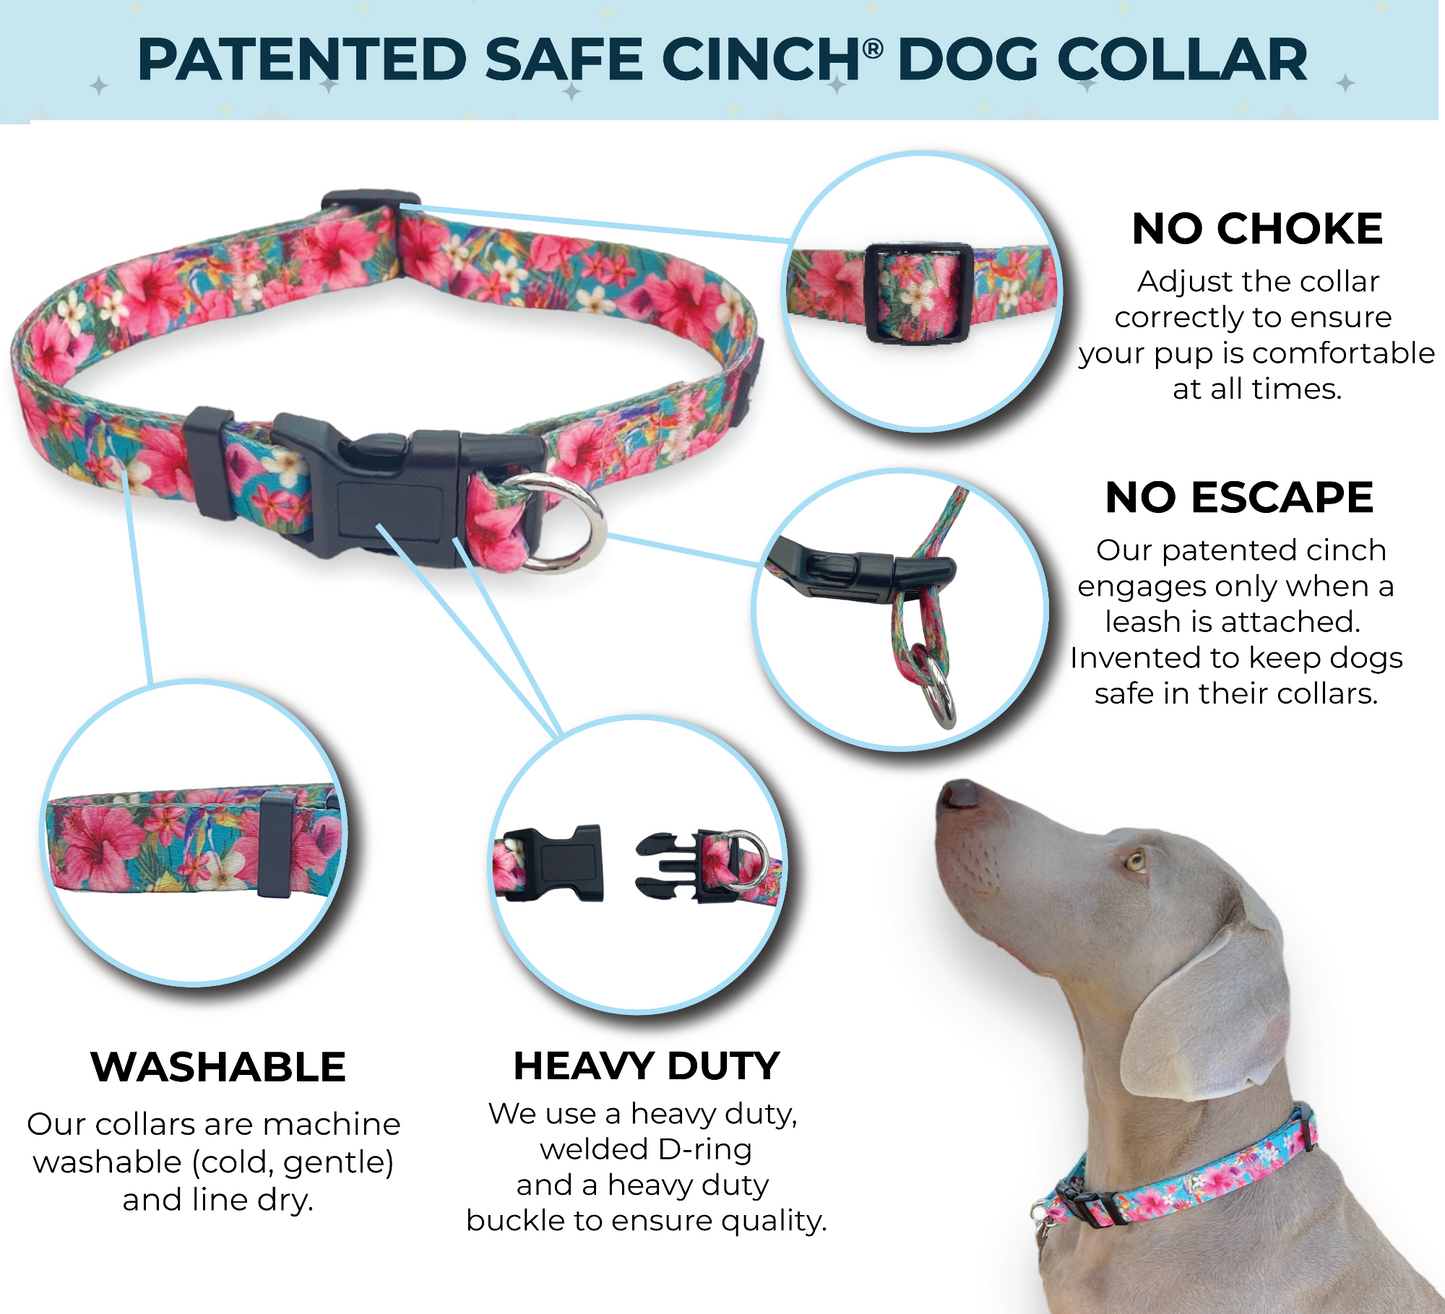 an infographic for a large dog collar on a Weimaraner dog it is a safe cinch no escape dog collar by fearless pet